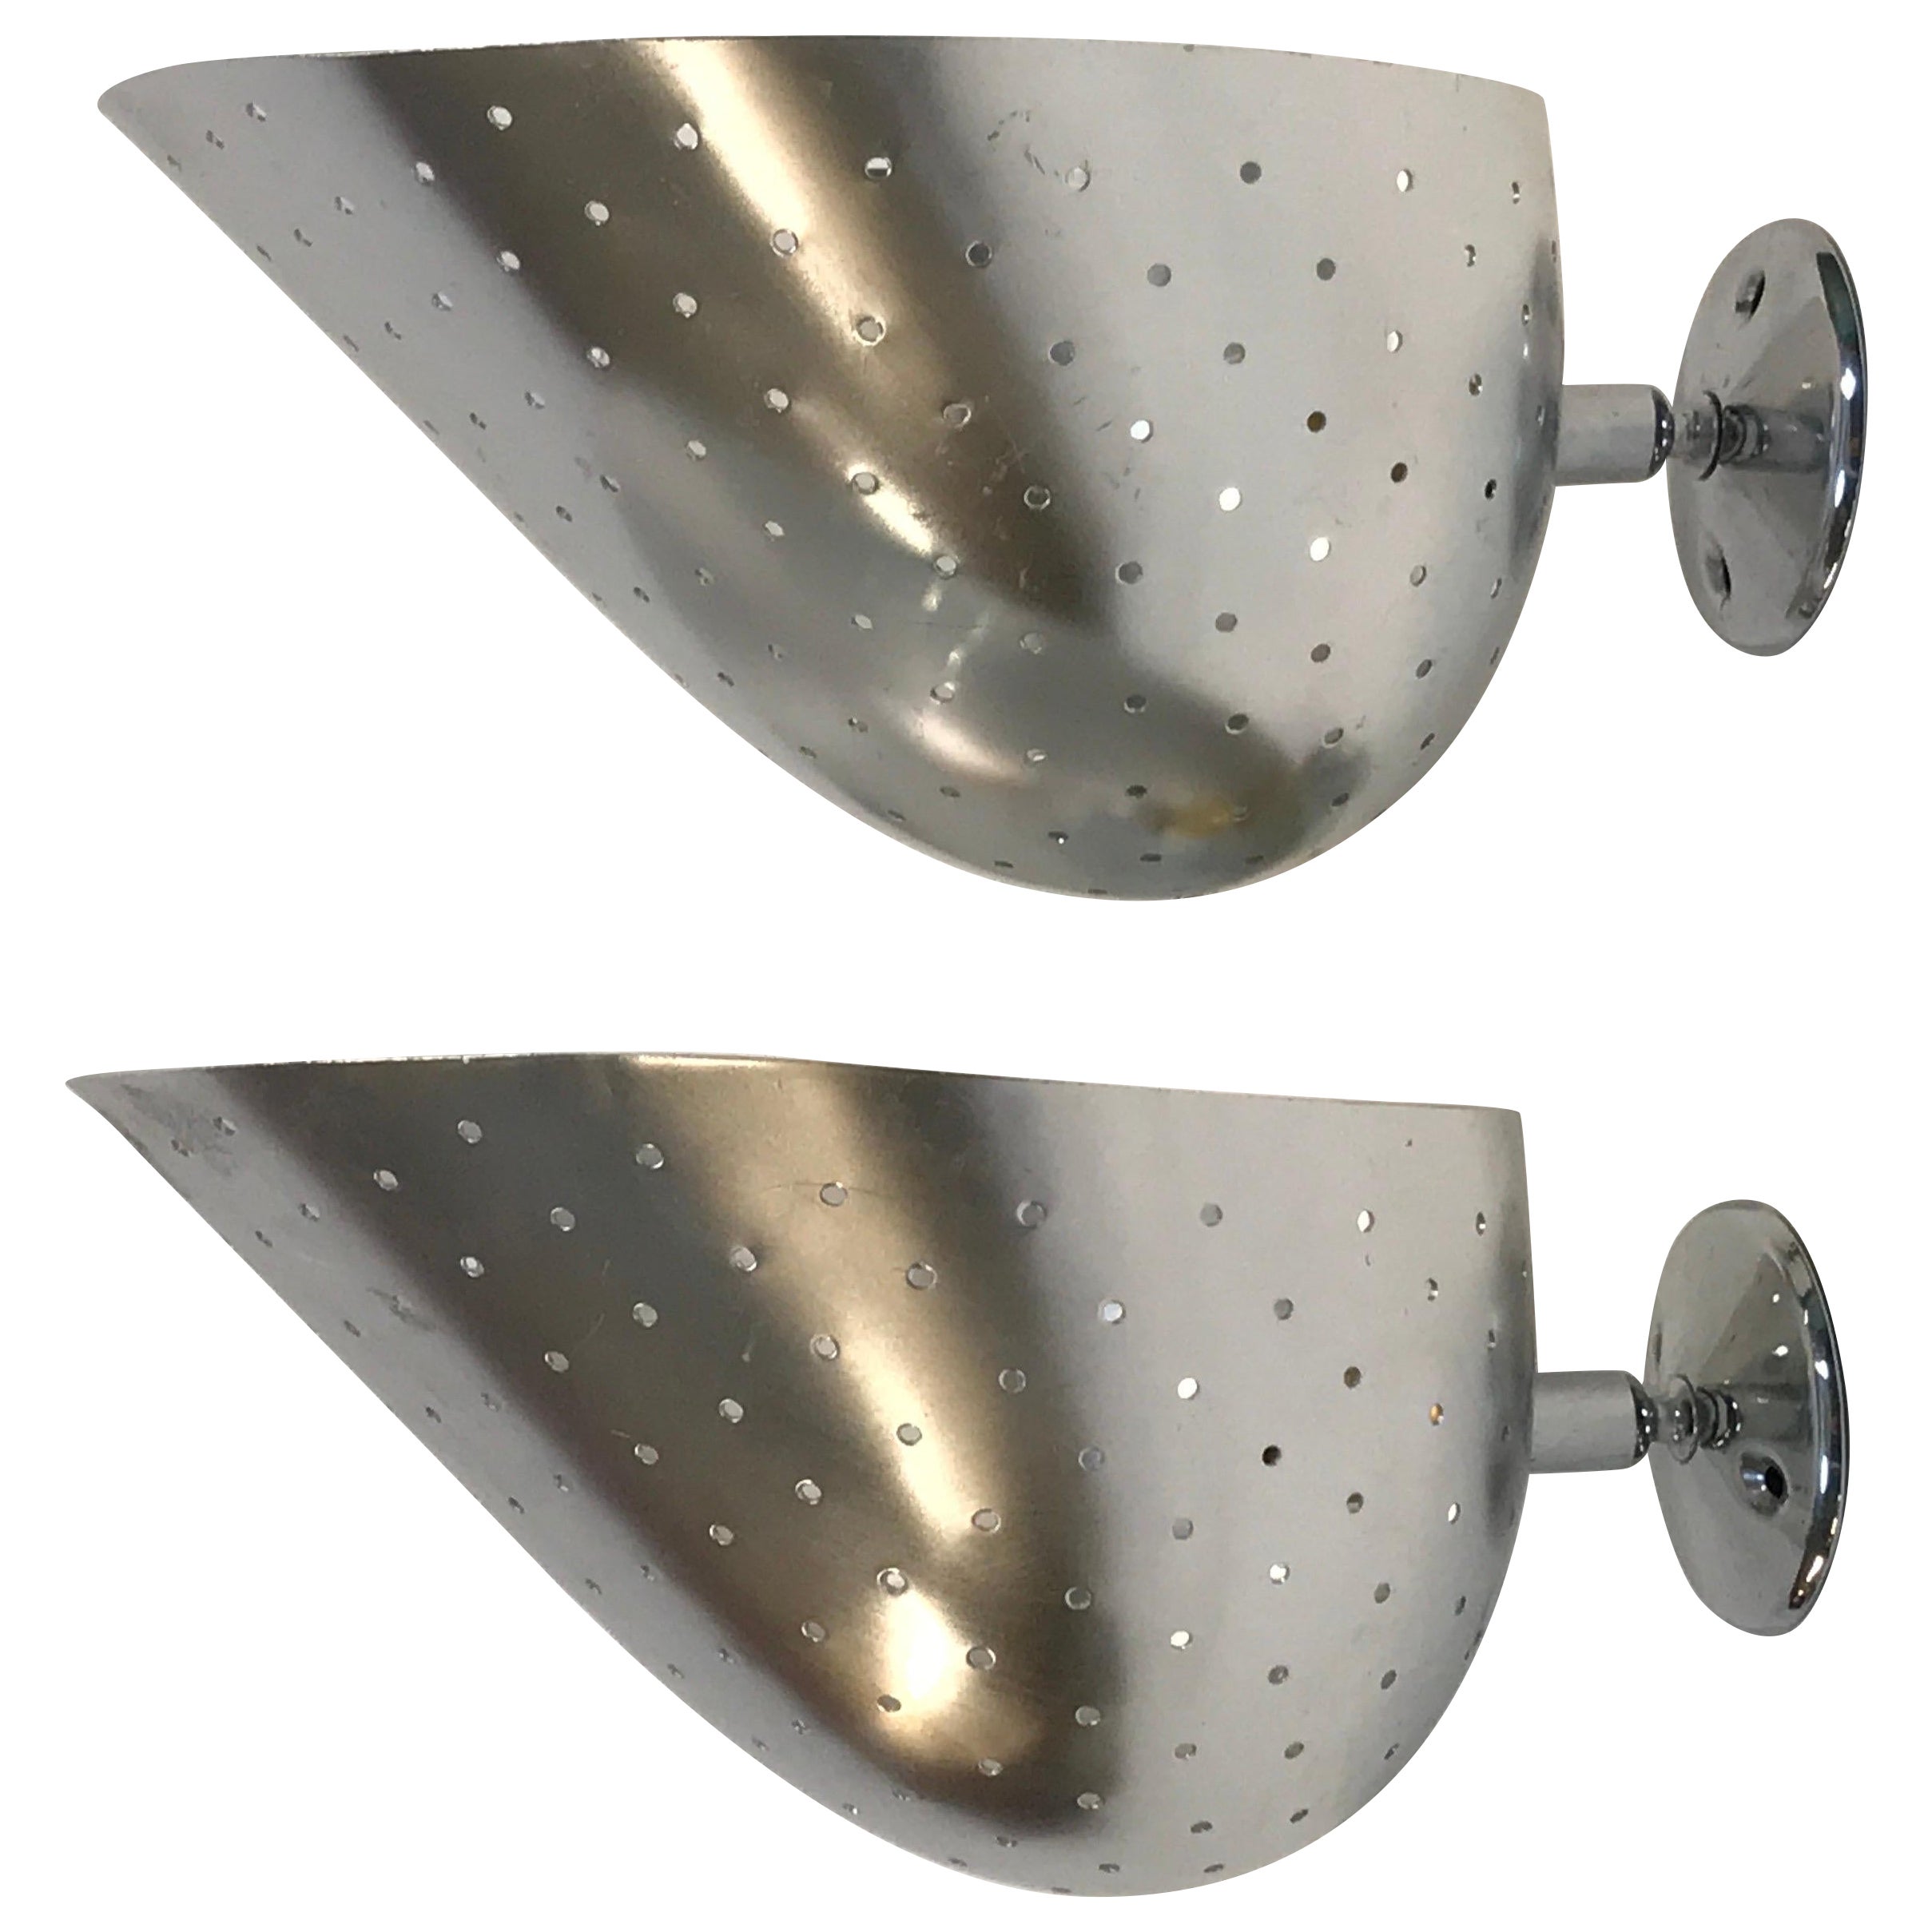 Pair of 1950’s Perforated Spun Aluminium English Sconces by Courtney Pope